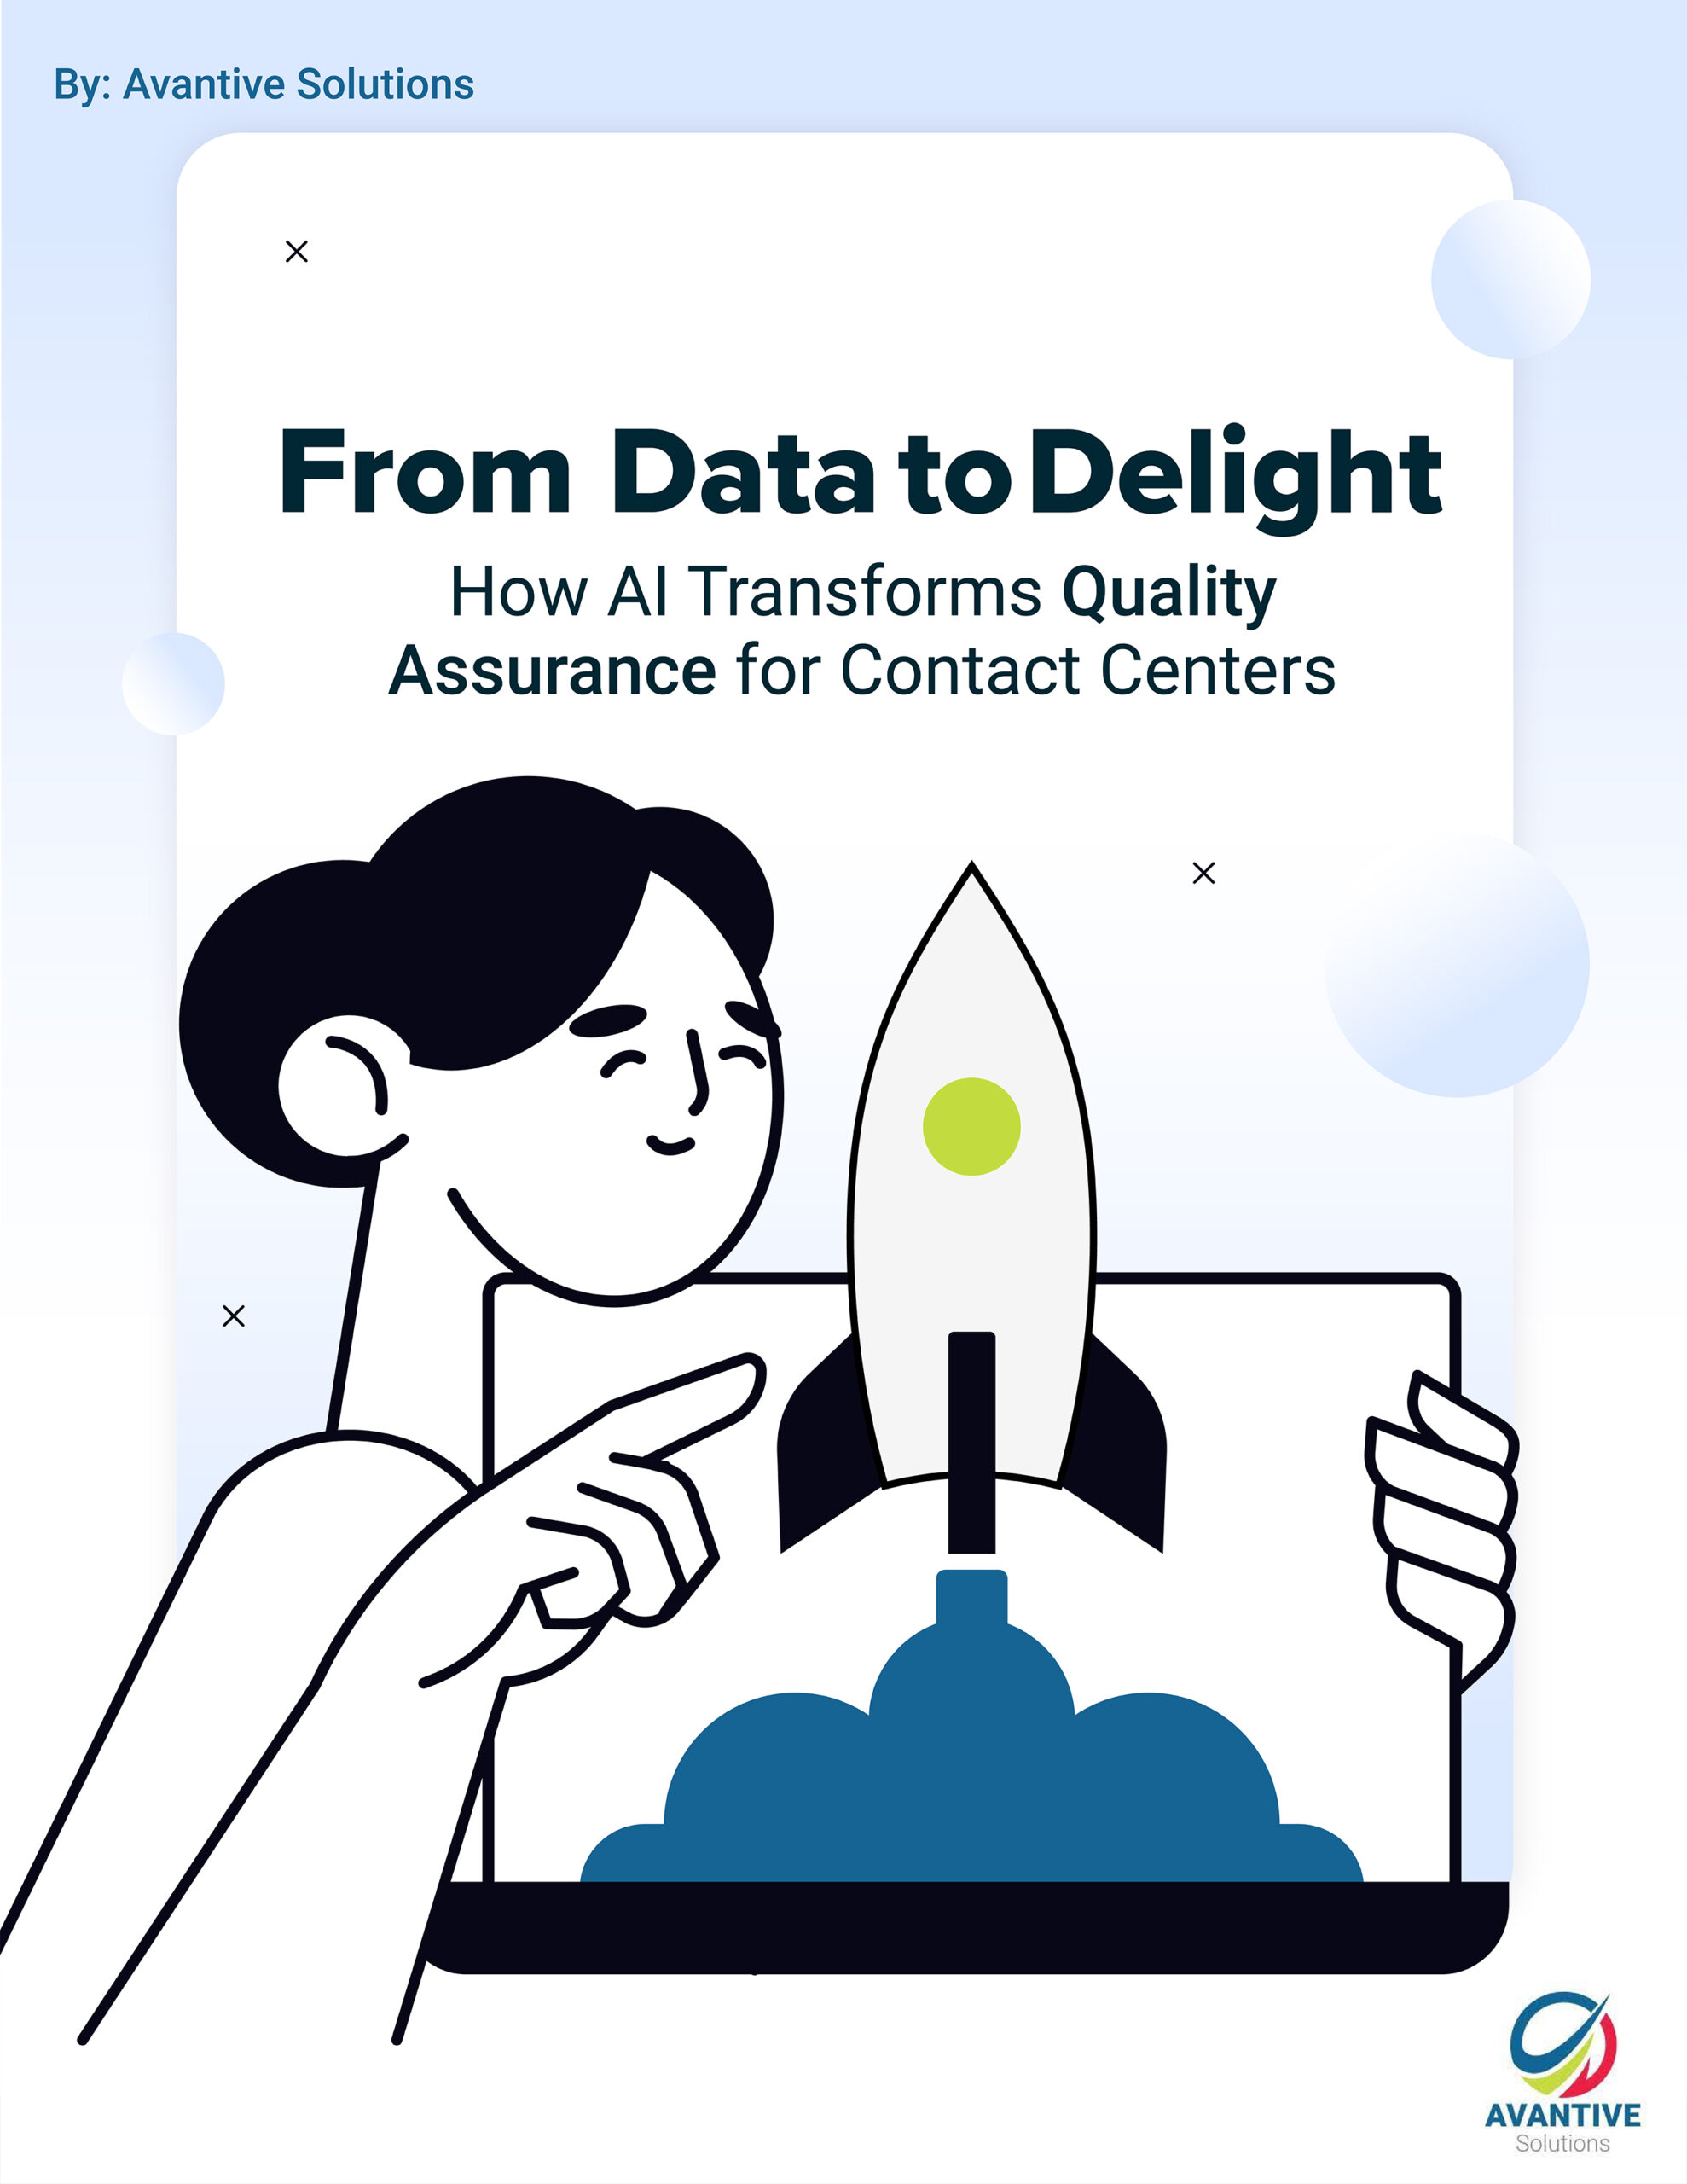 From Data to Delight: How AI Transforms Quality Assurance for Contact Centers